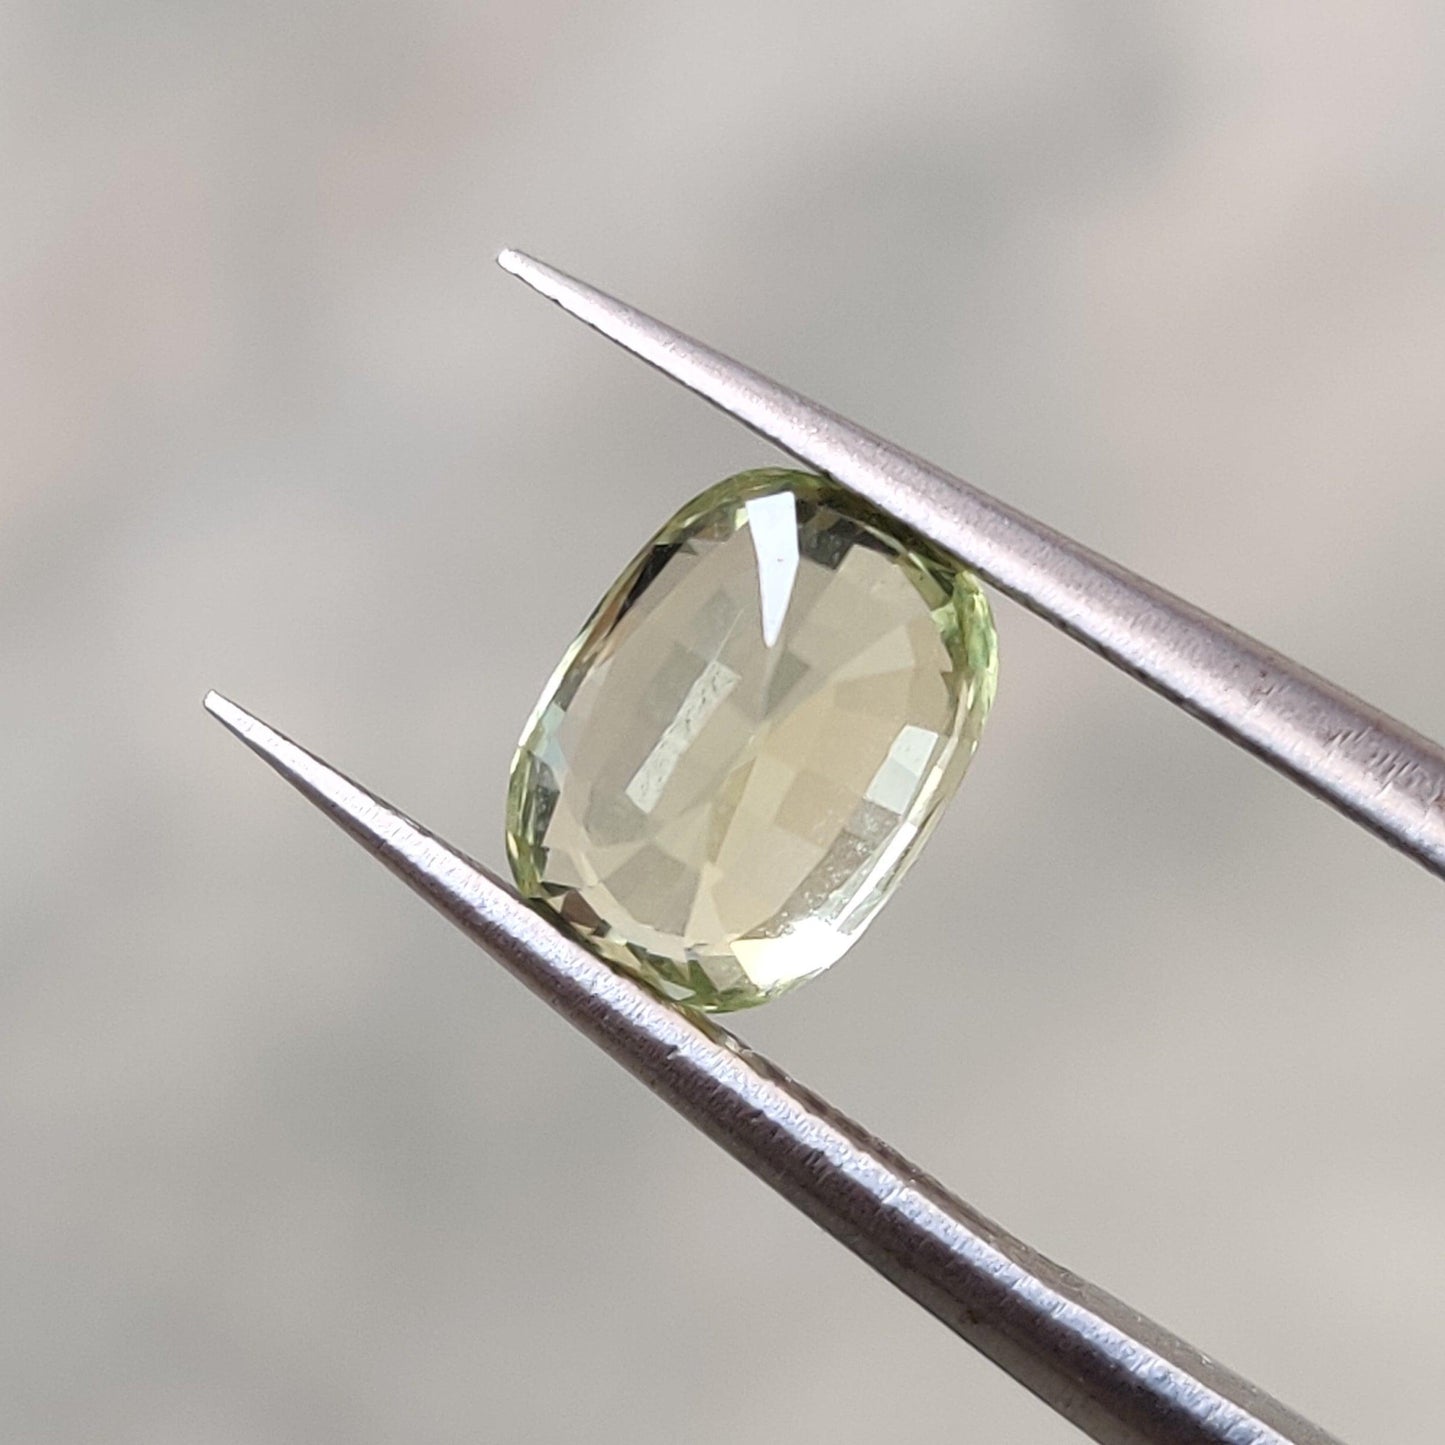 Chrysoberyl Natural 2.07ct - The Colored Stone Co.